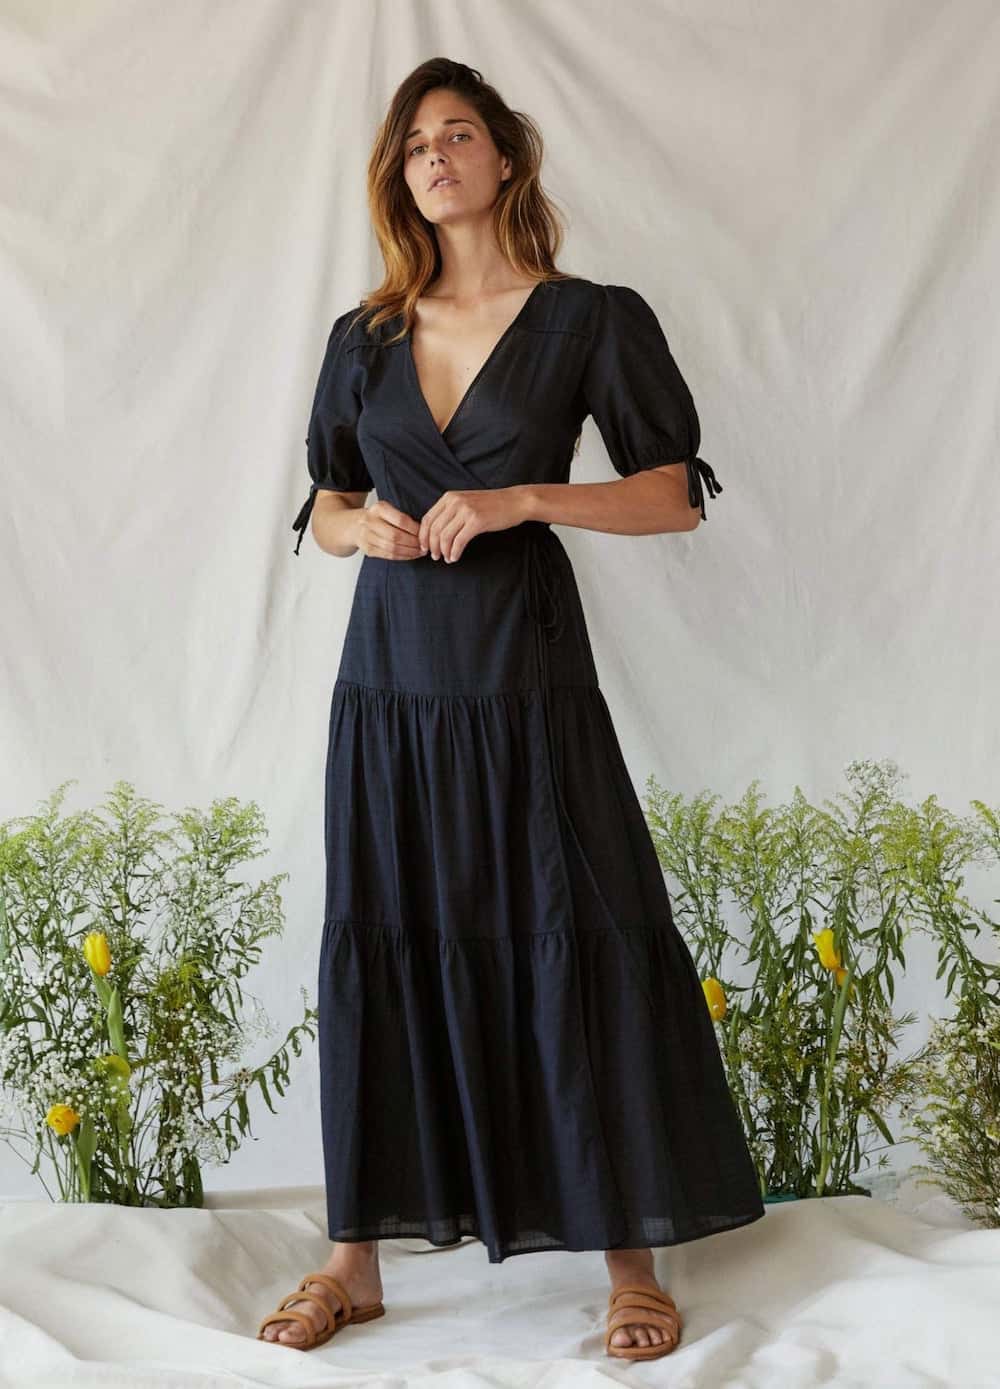 image of a woman in a black maxi dress with puff sleeves